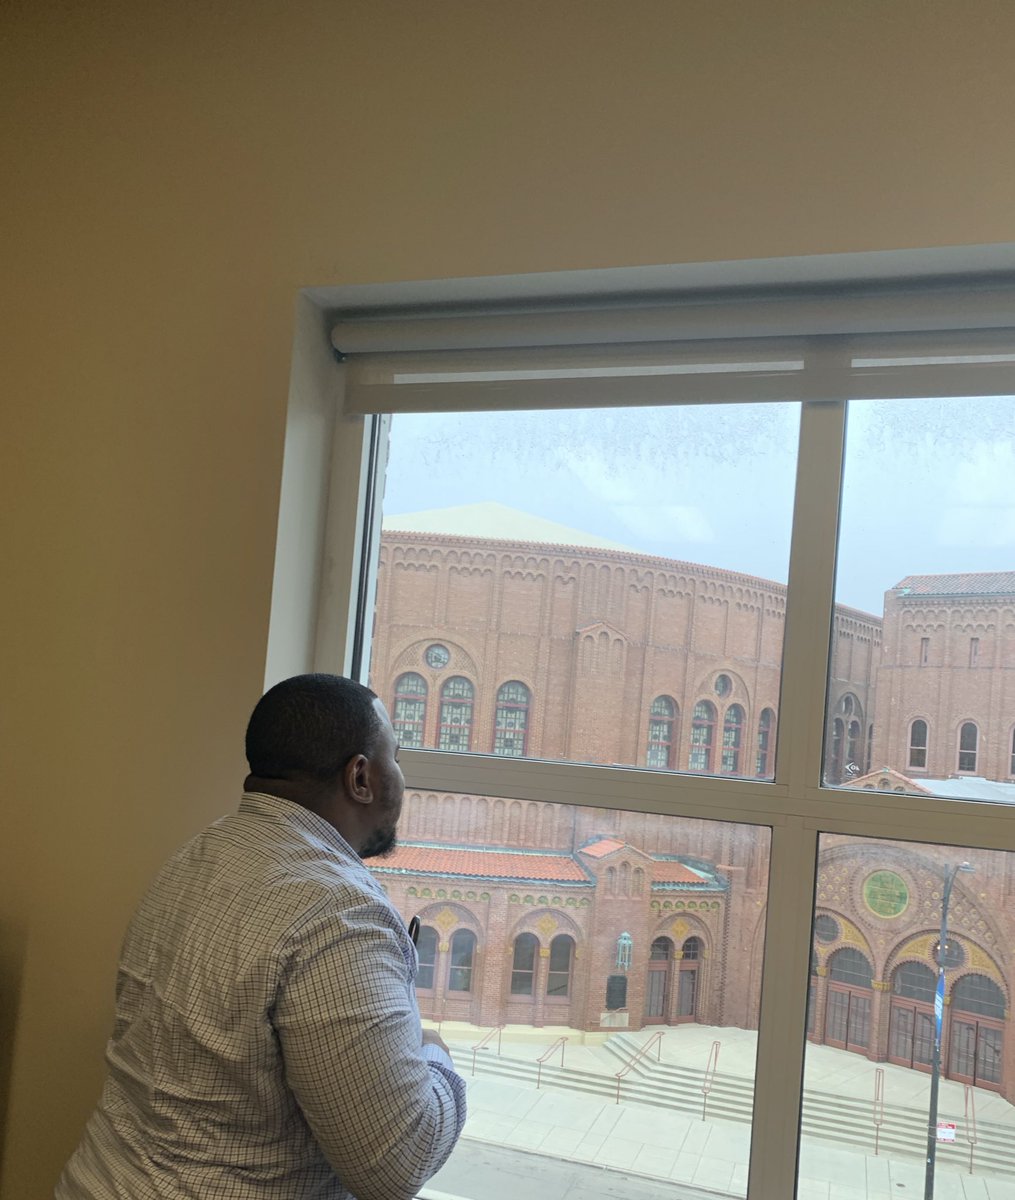 Wednesday June 19, 2019. “Idk if it’s raining or if this window is just dirty”